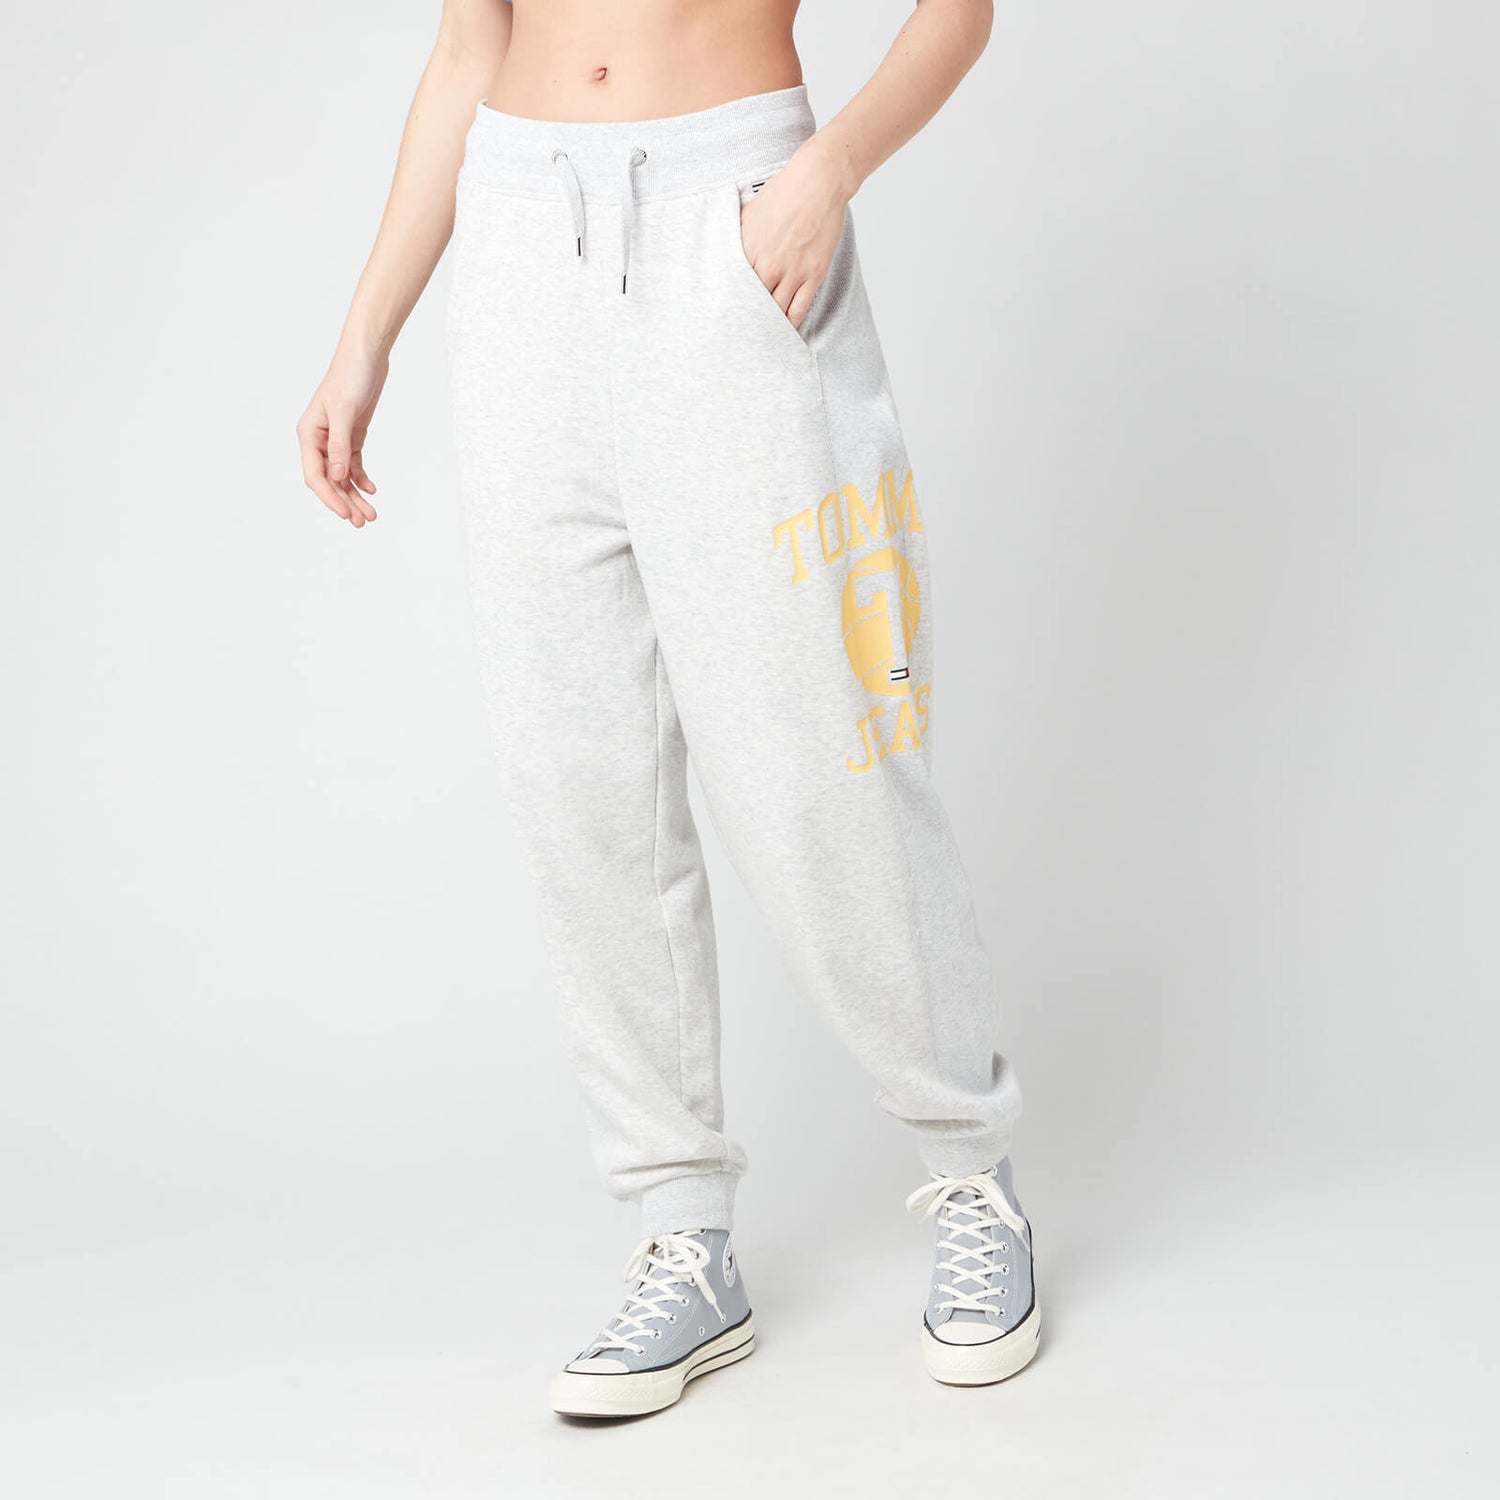 Tommy Jeans Women's TJW Relaxed Hrs Bball Sweatpants - Silver Grey HTR